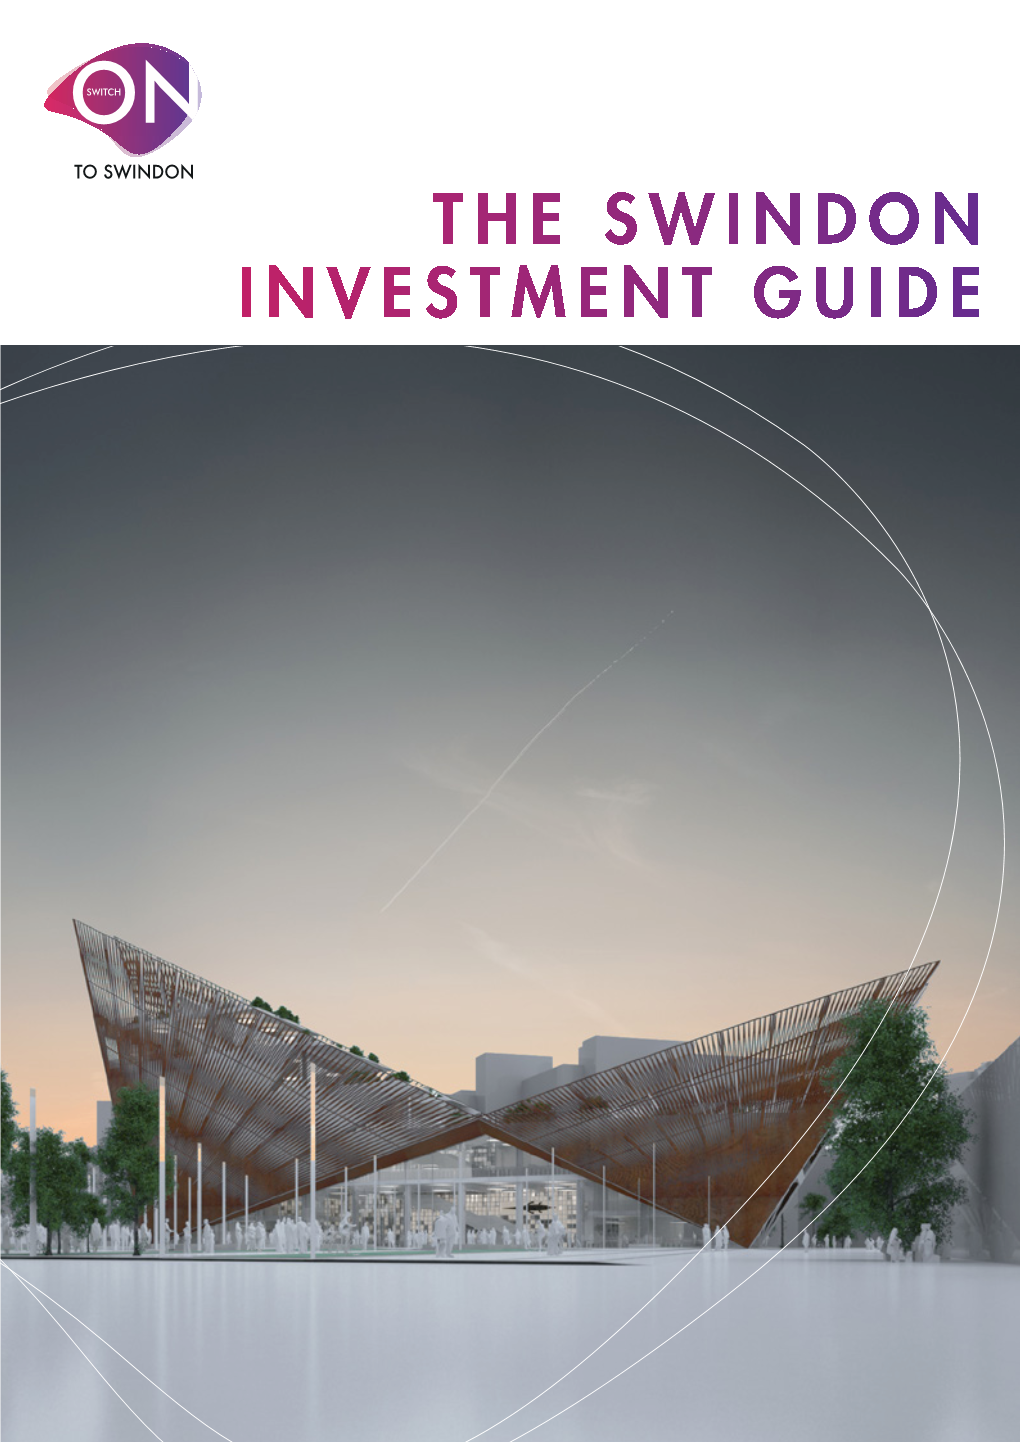 The Swindon Investment Guide